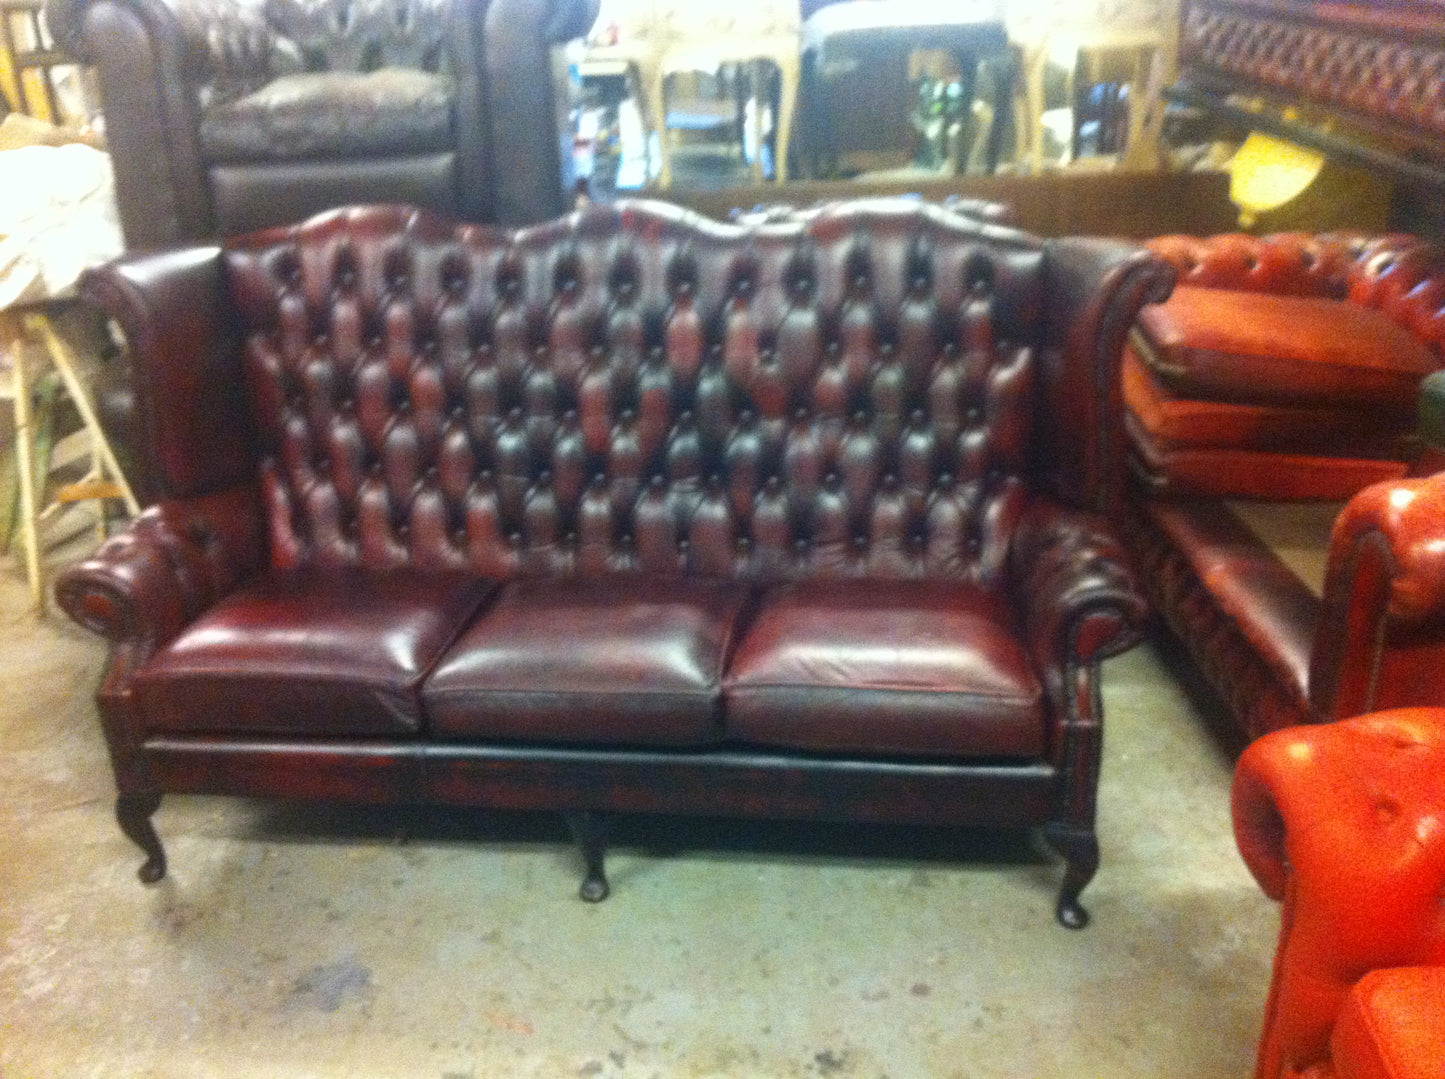 Lovely Oxblood Red Vintage Leather "Queen Anne" style 3 seat sofa / settee